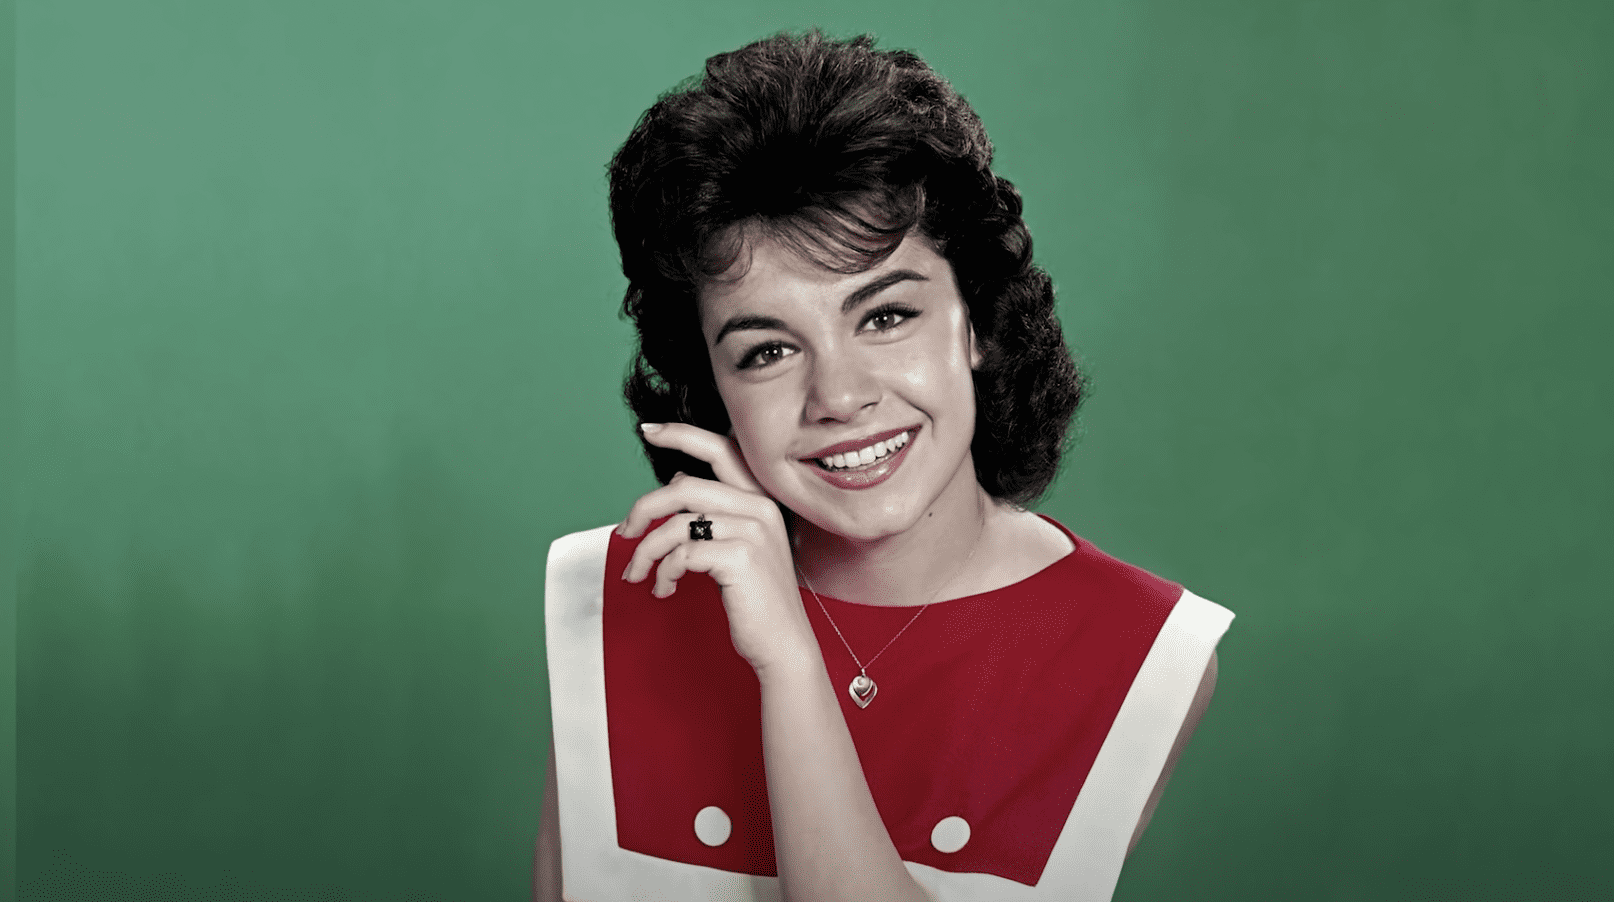 Annette Funicello's portrait against a green background. | Source: Youtube/FactsVerse